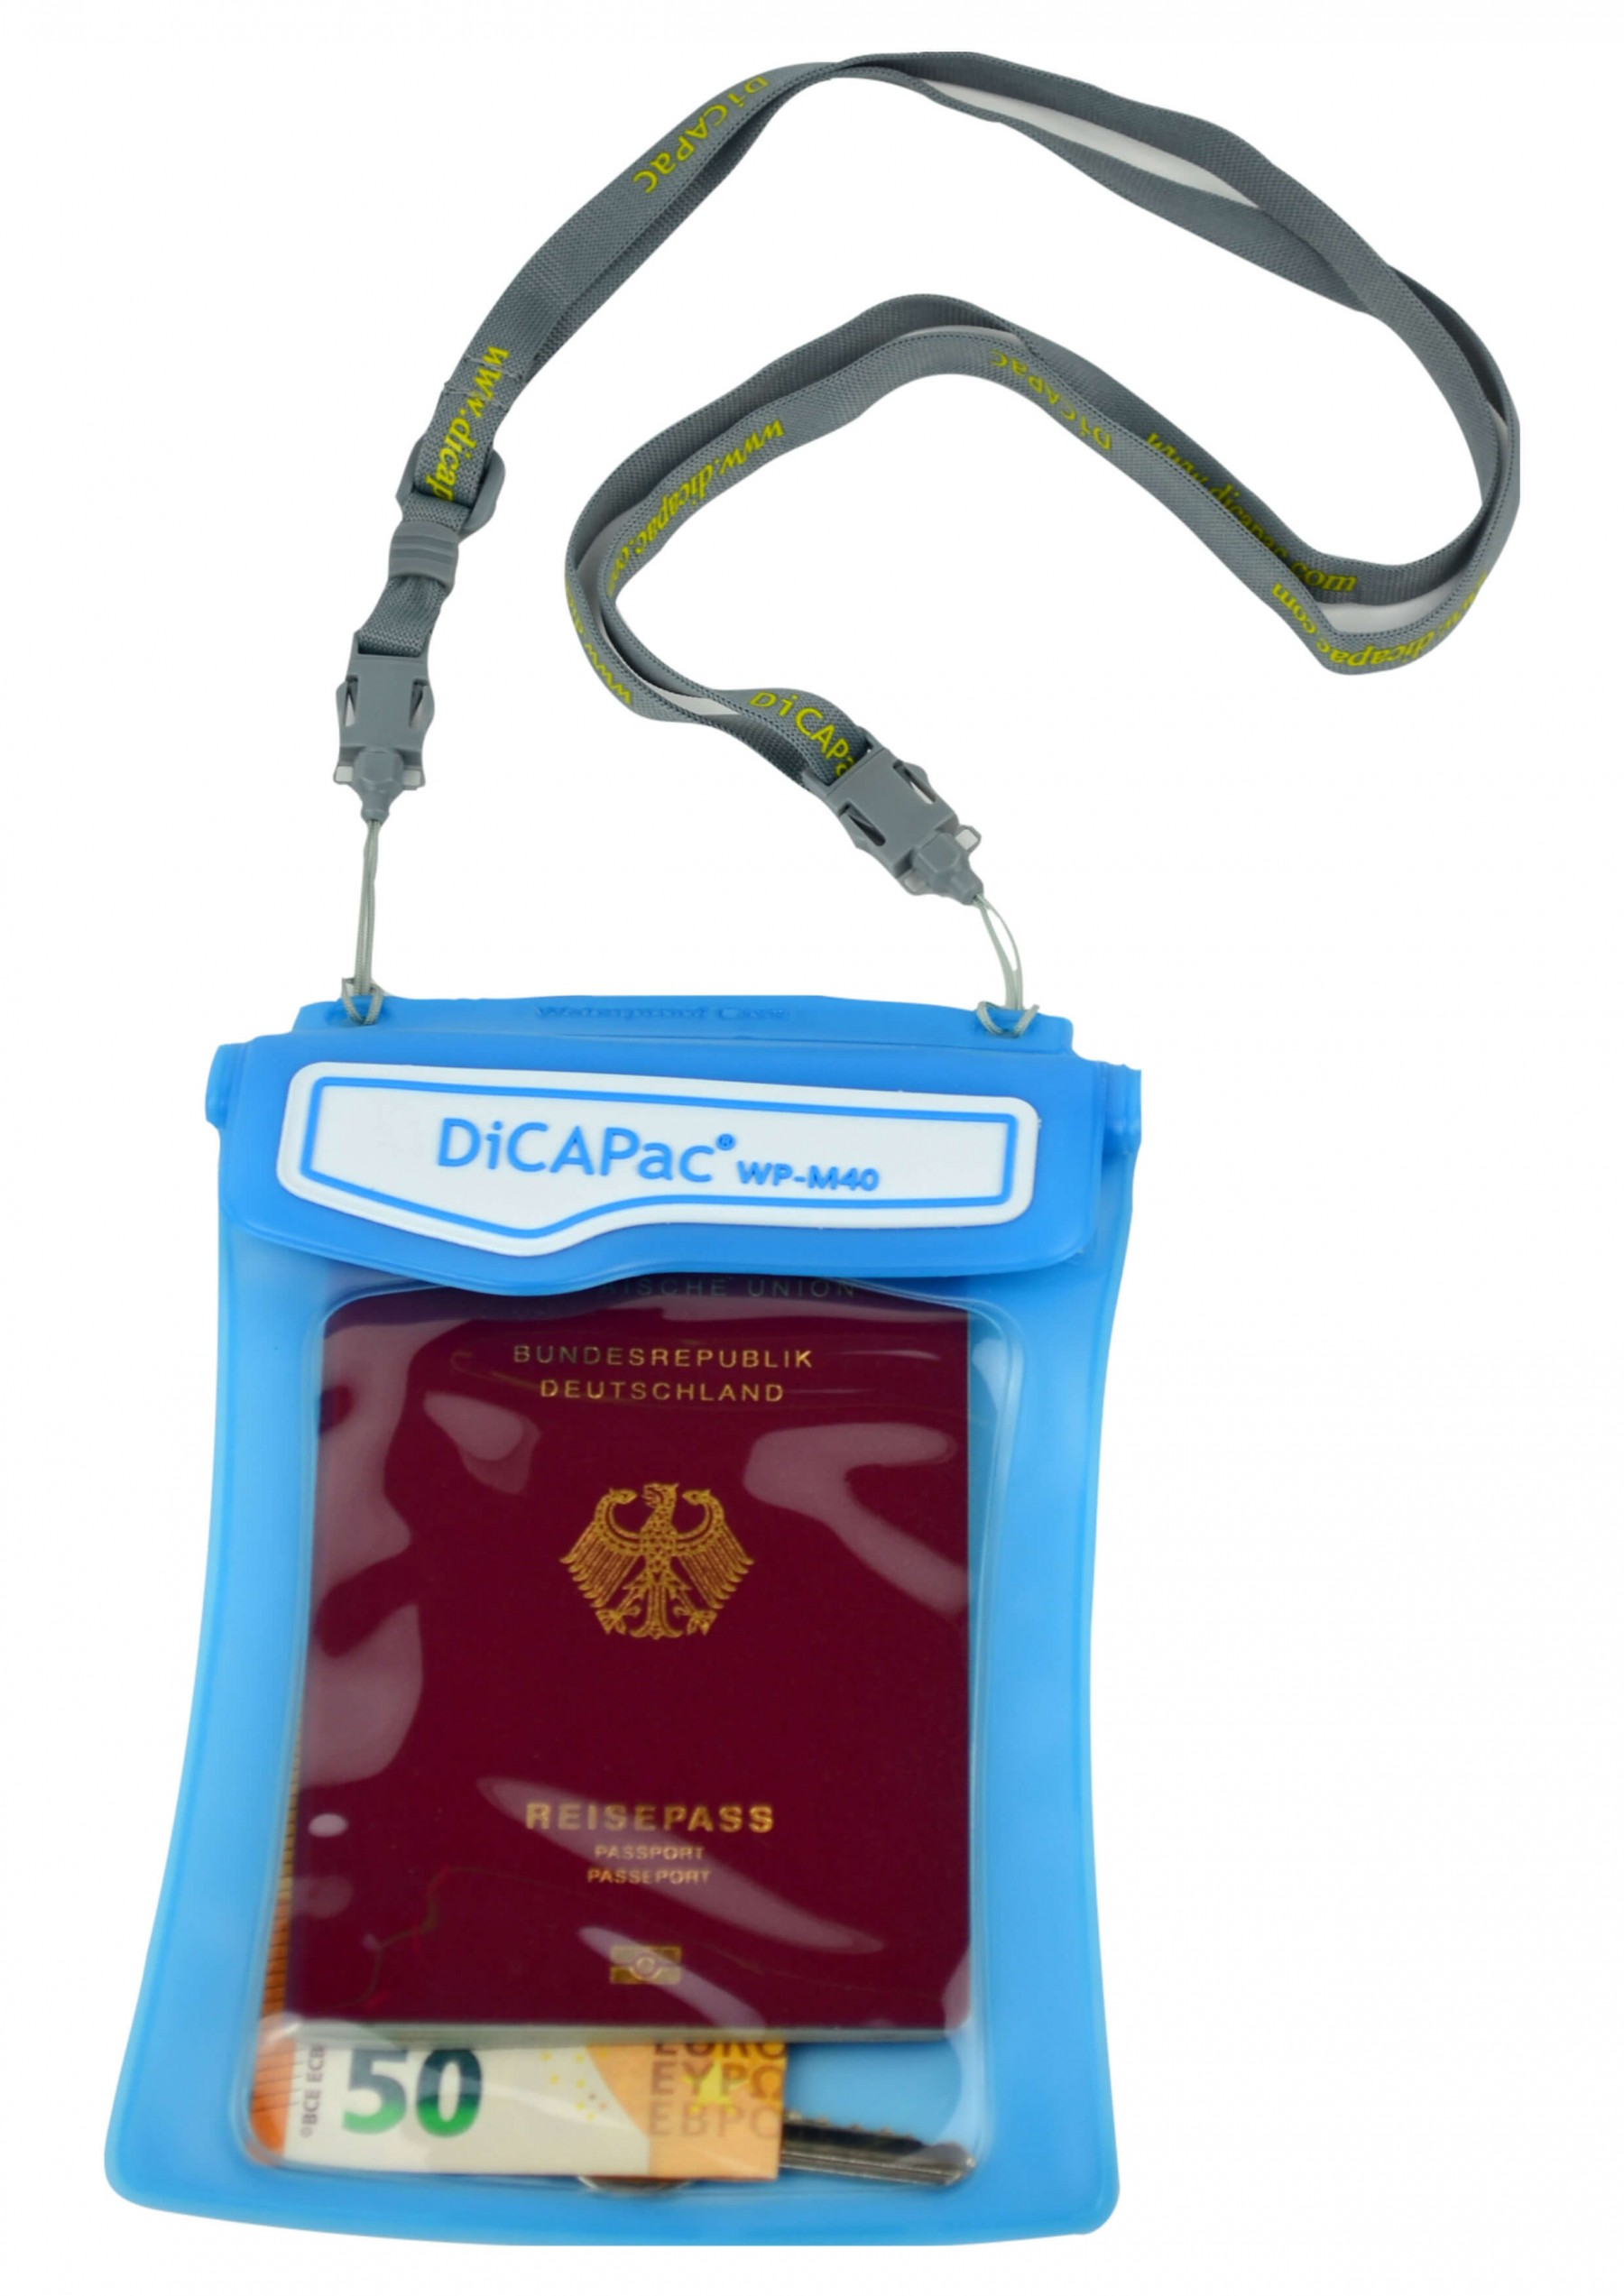  dicapac-wp-m40-waterproof-document-holder-for-up-to-16ft-5m-water-depth-31